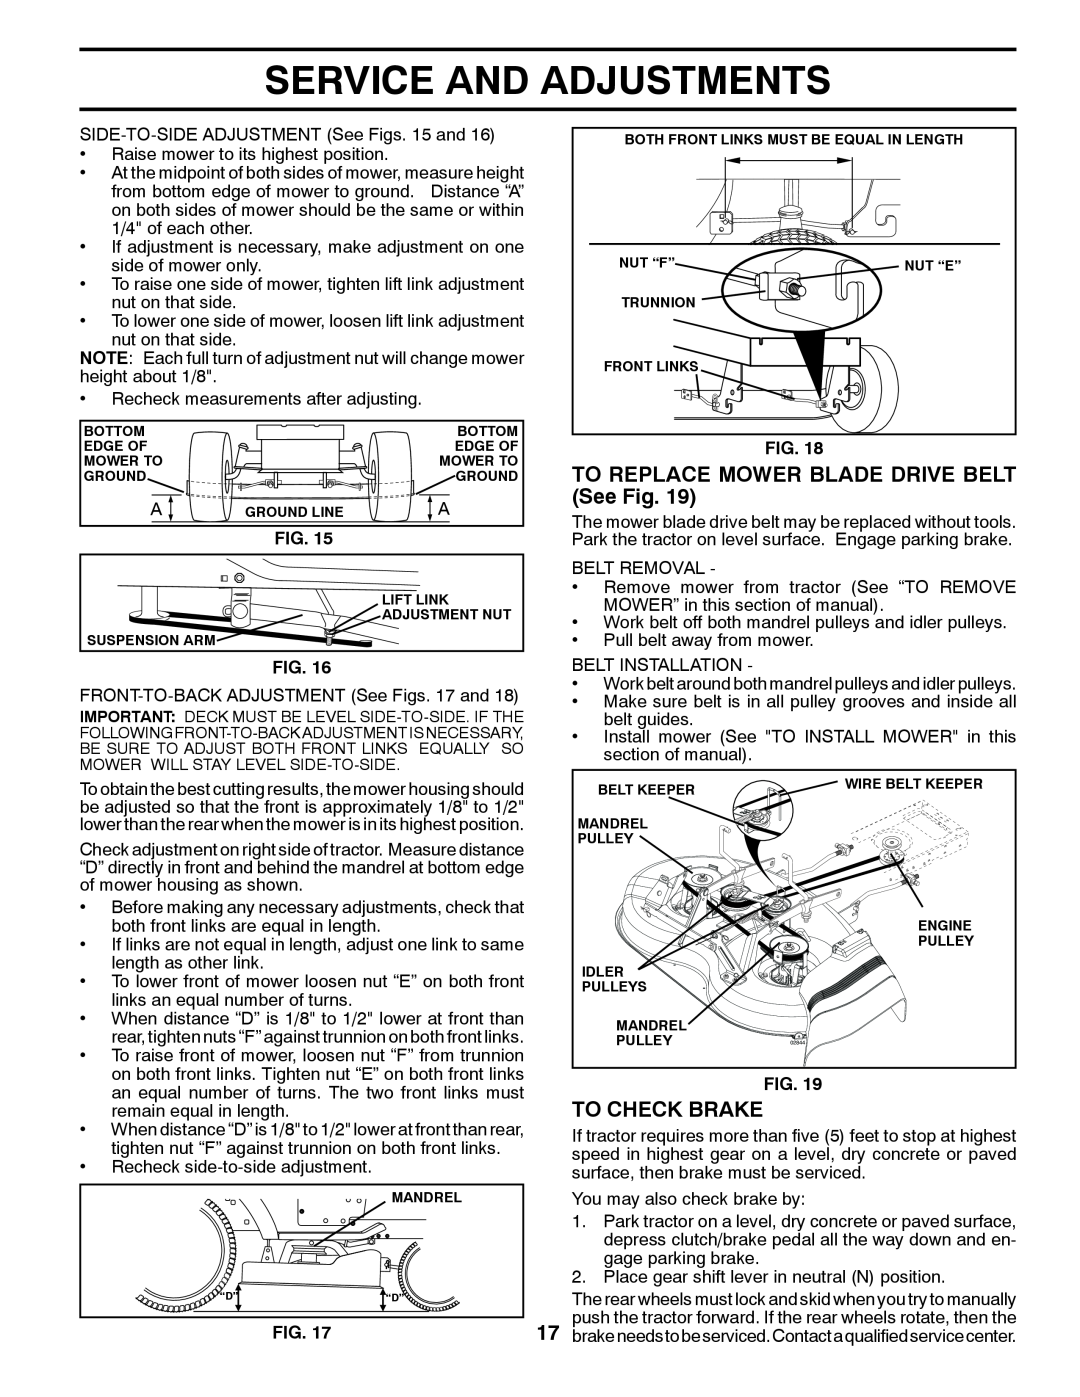 Poulan 424368 manual TO REPLACE MOWER BLADE DRIVE BELT See Fig, To Check Brake, Service And Adjustments 